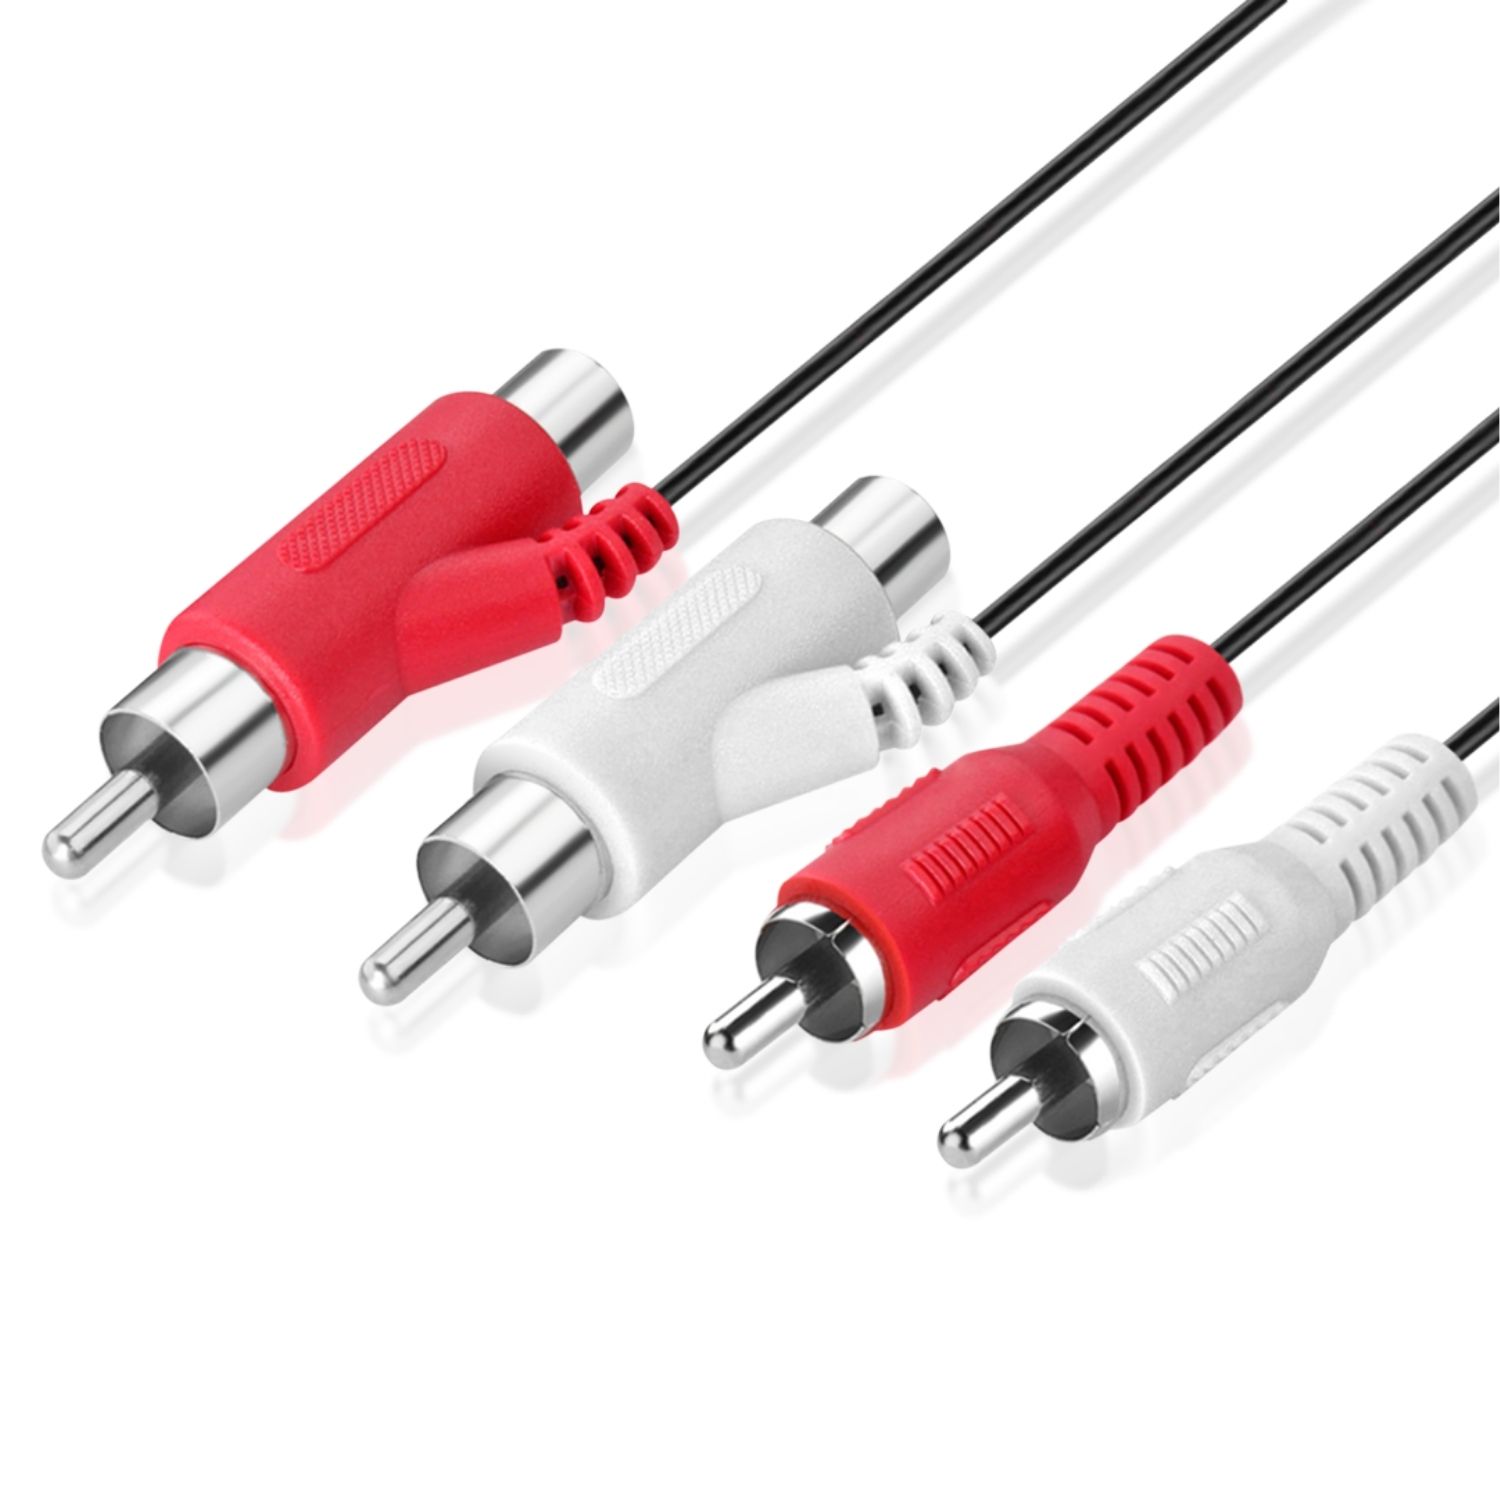 RCA Piggyback Extension Cable (6 Feet) 2RCA Audio Extender Adapter Cord Wire Coupler Male to Female Dual Red/White Connector Jack Plug Extend Video Audio 2 Channel Stereo (Right and Left) - image 1 of 4